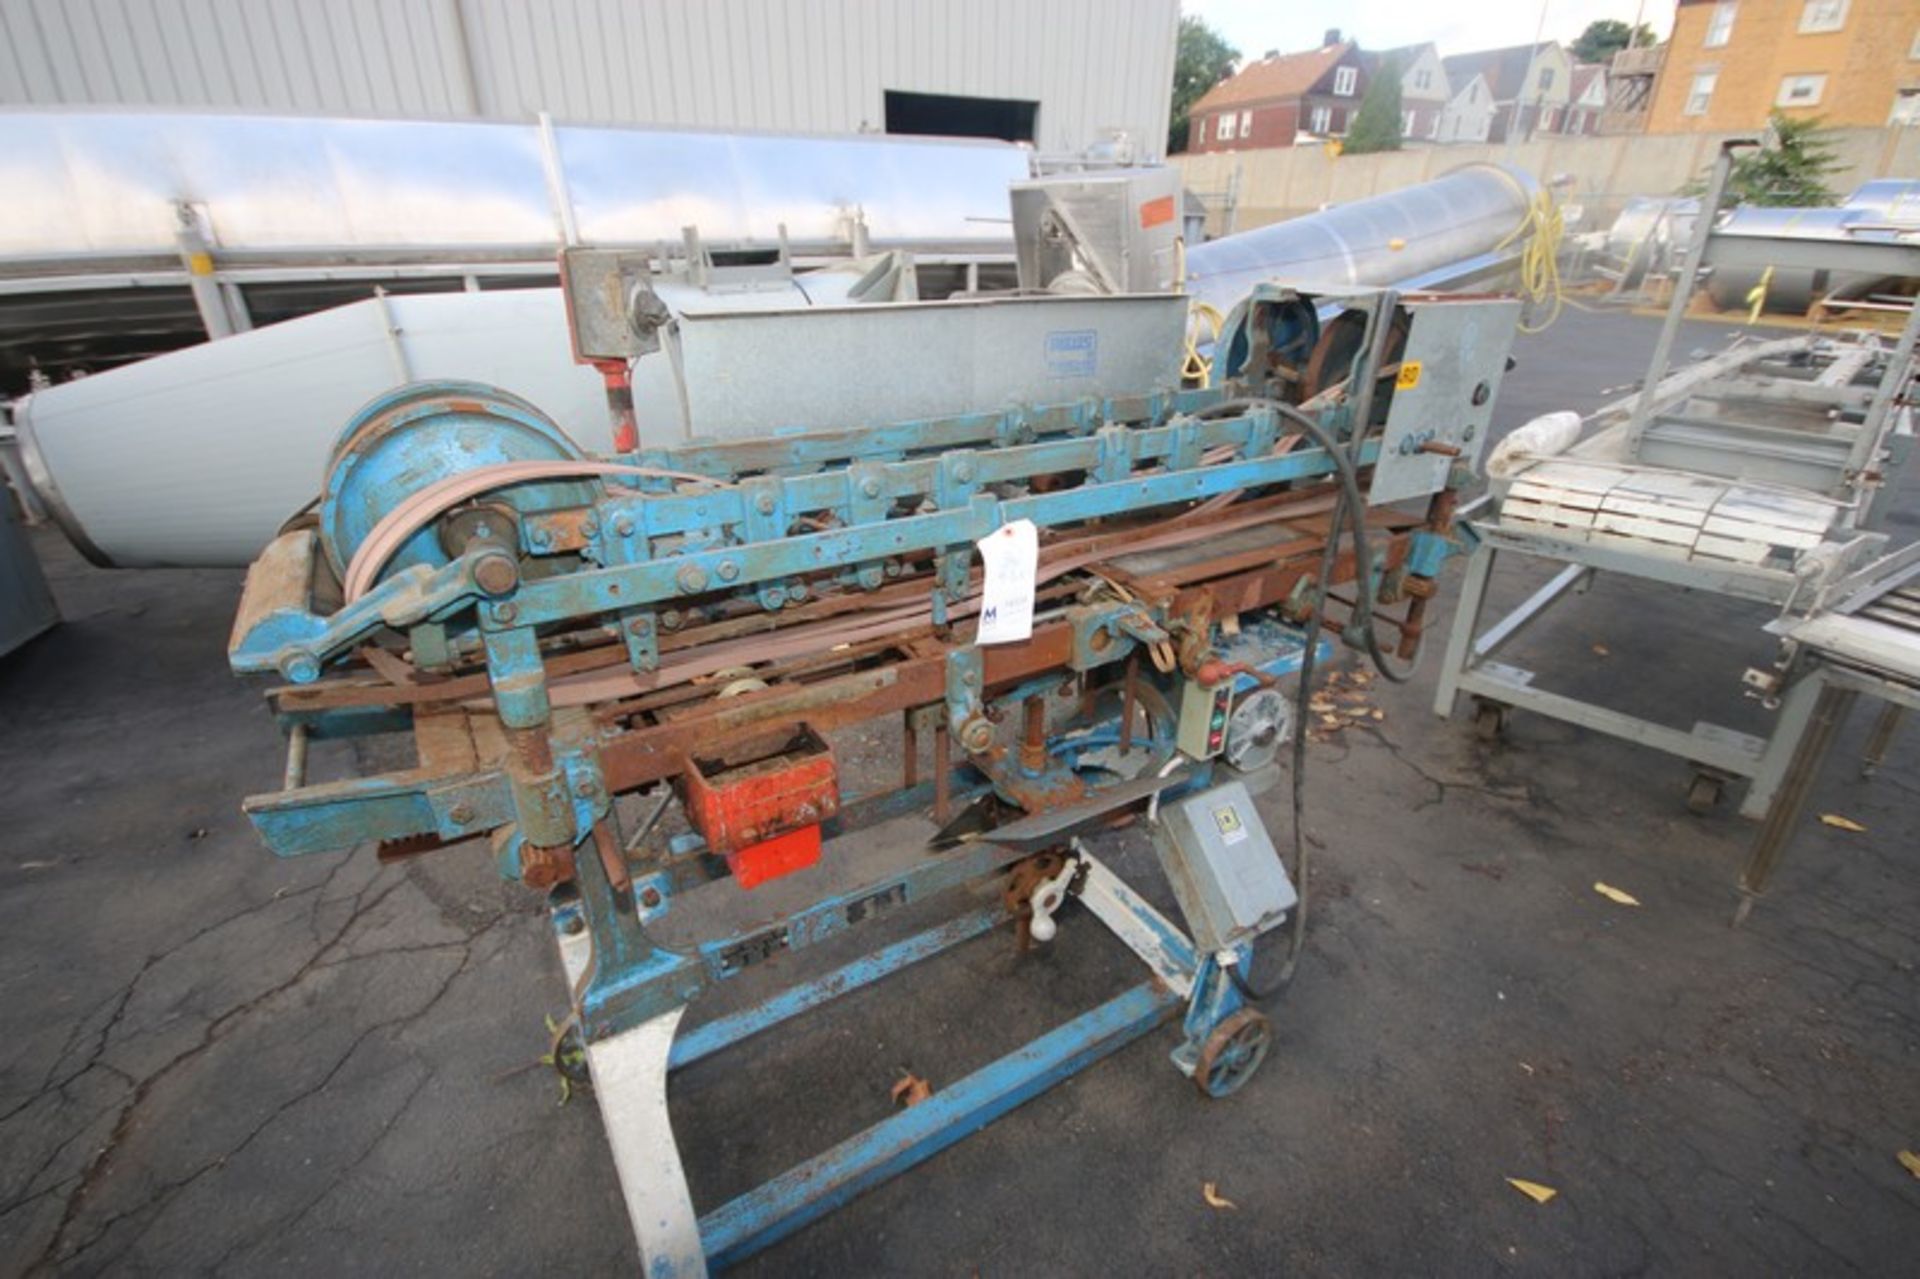 Burt Roll Through Labeling Machine, S/N 13465 - Possibly Missing Parts (INV#73223) (LOCATED AT MDG - Image 3 of 5